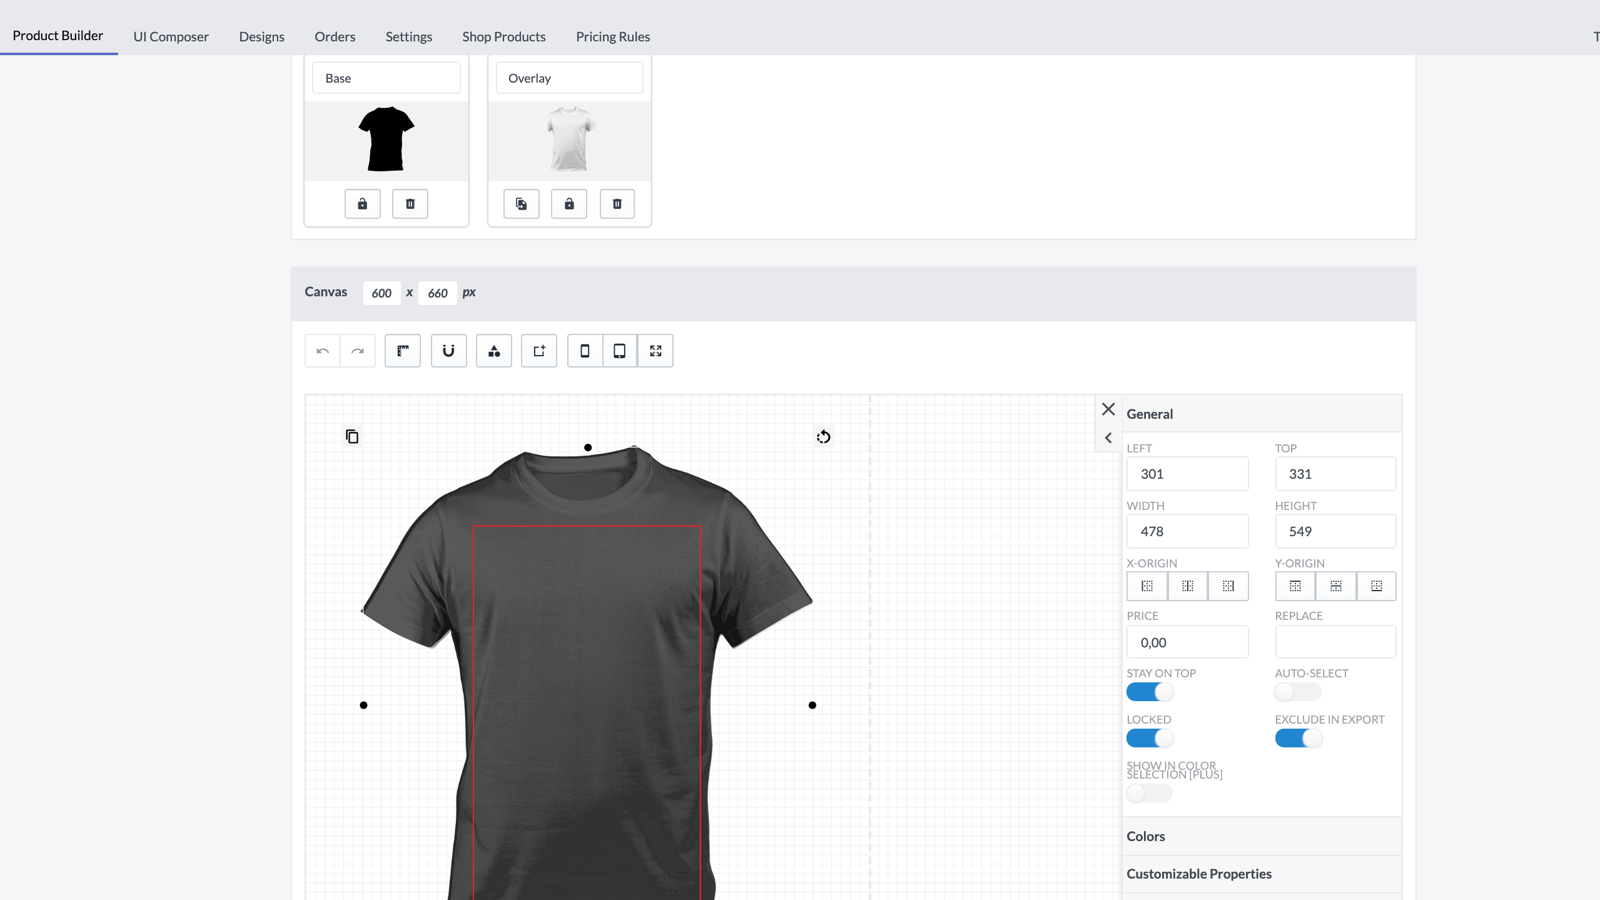 Set up your product templates with our Product Builder.